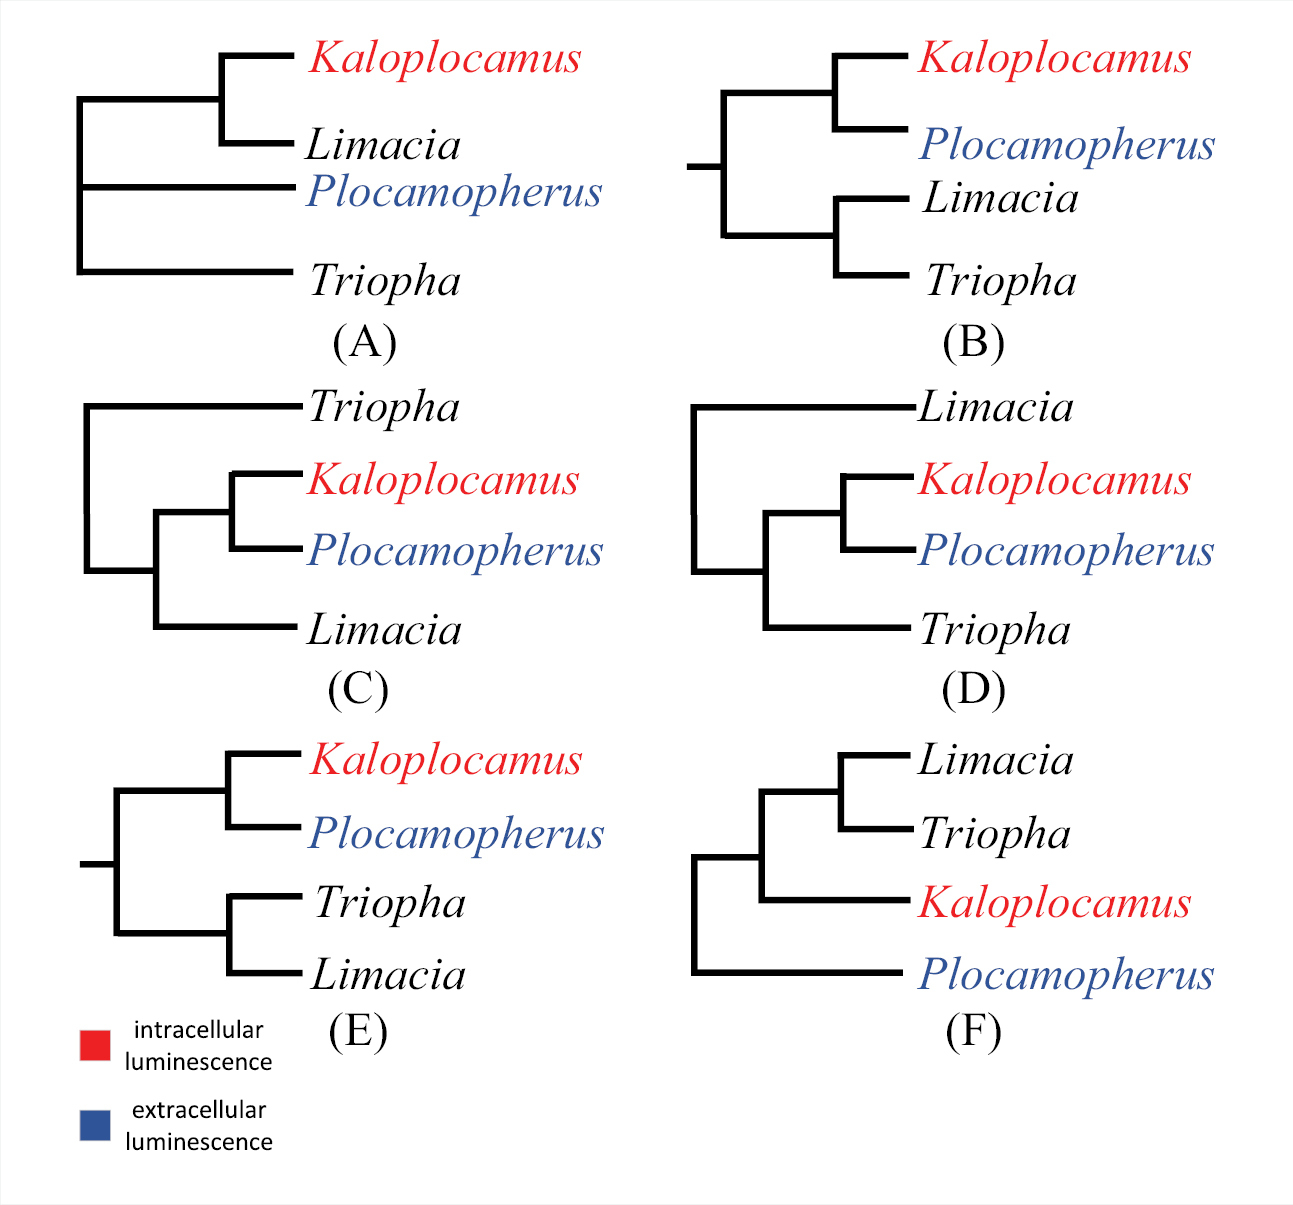 Taxonomic review of Kaloplocamus from the Yellow Sea, China with